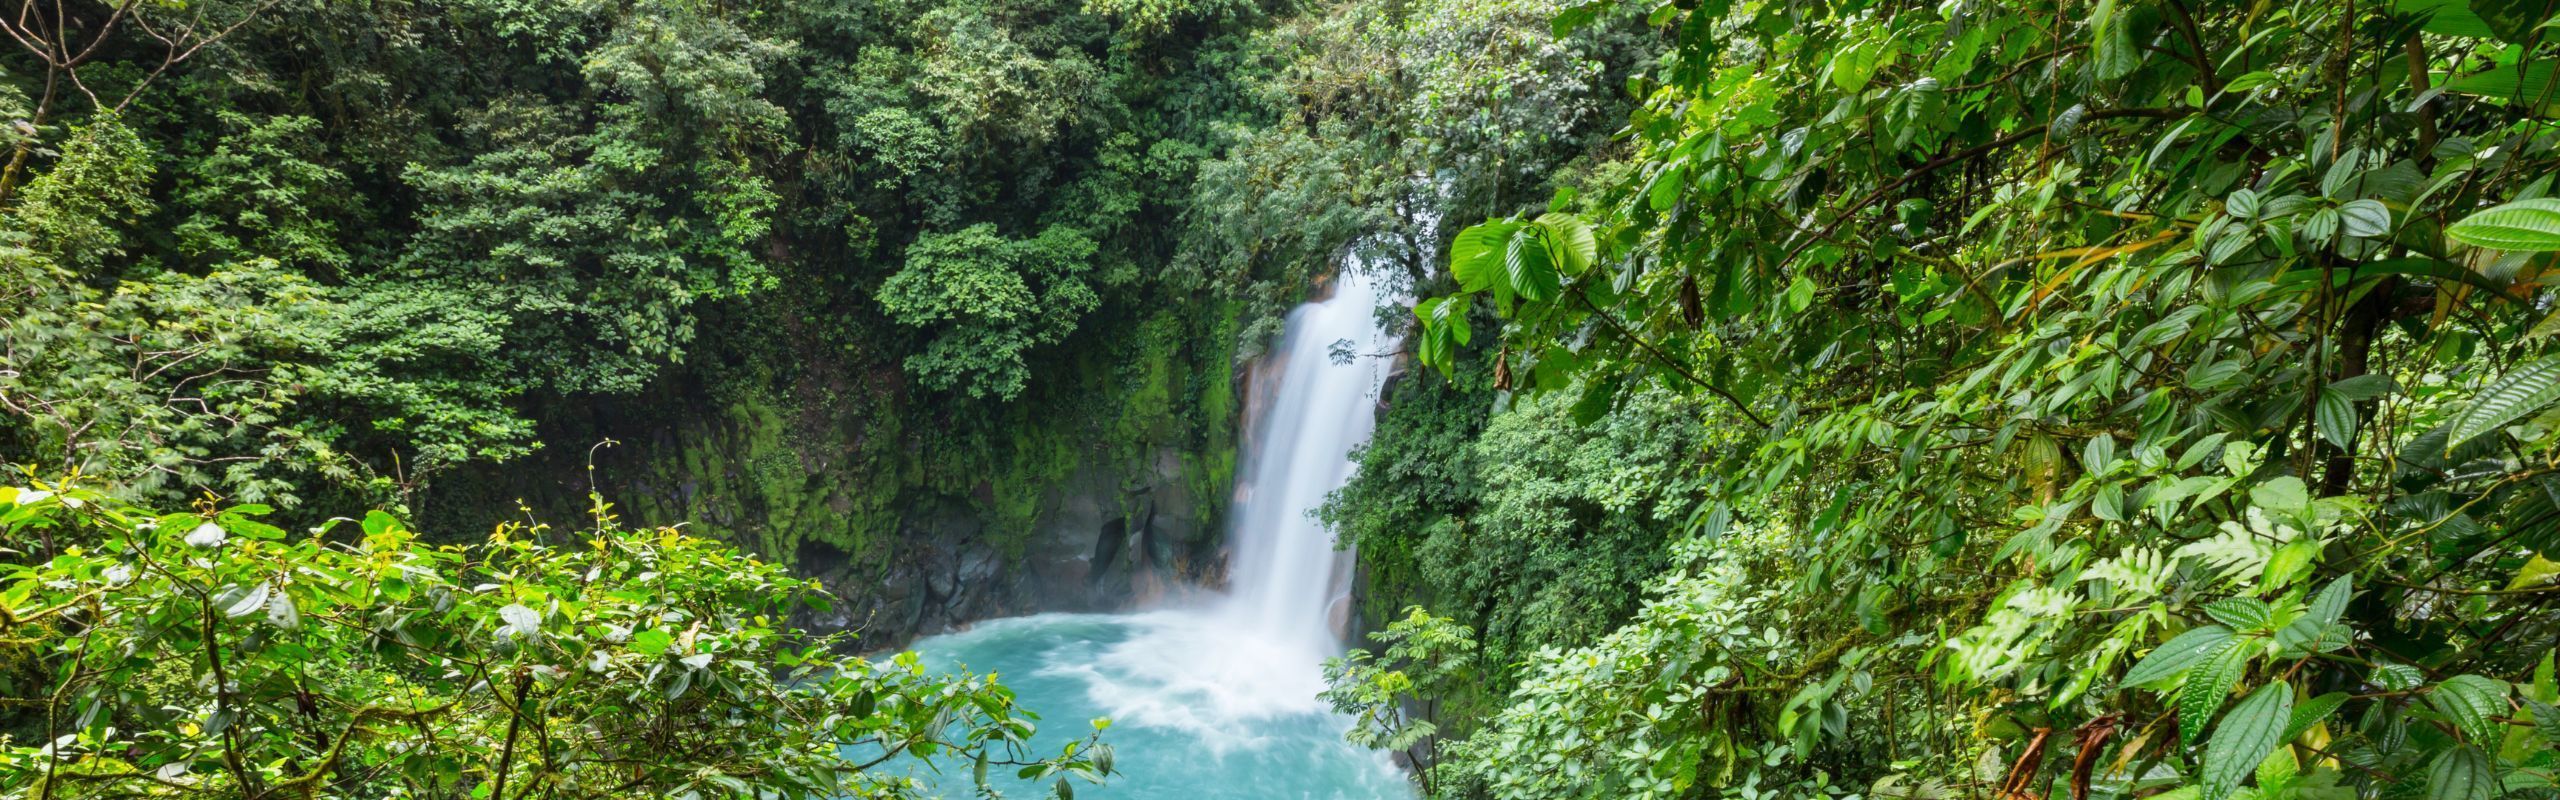 Image of a waterfall in Costa Rica